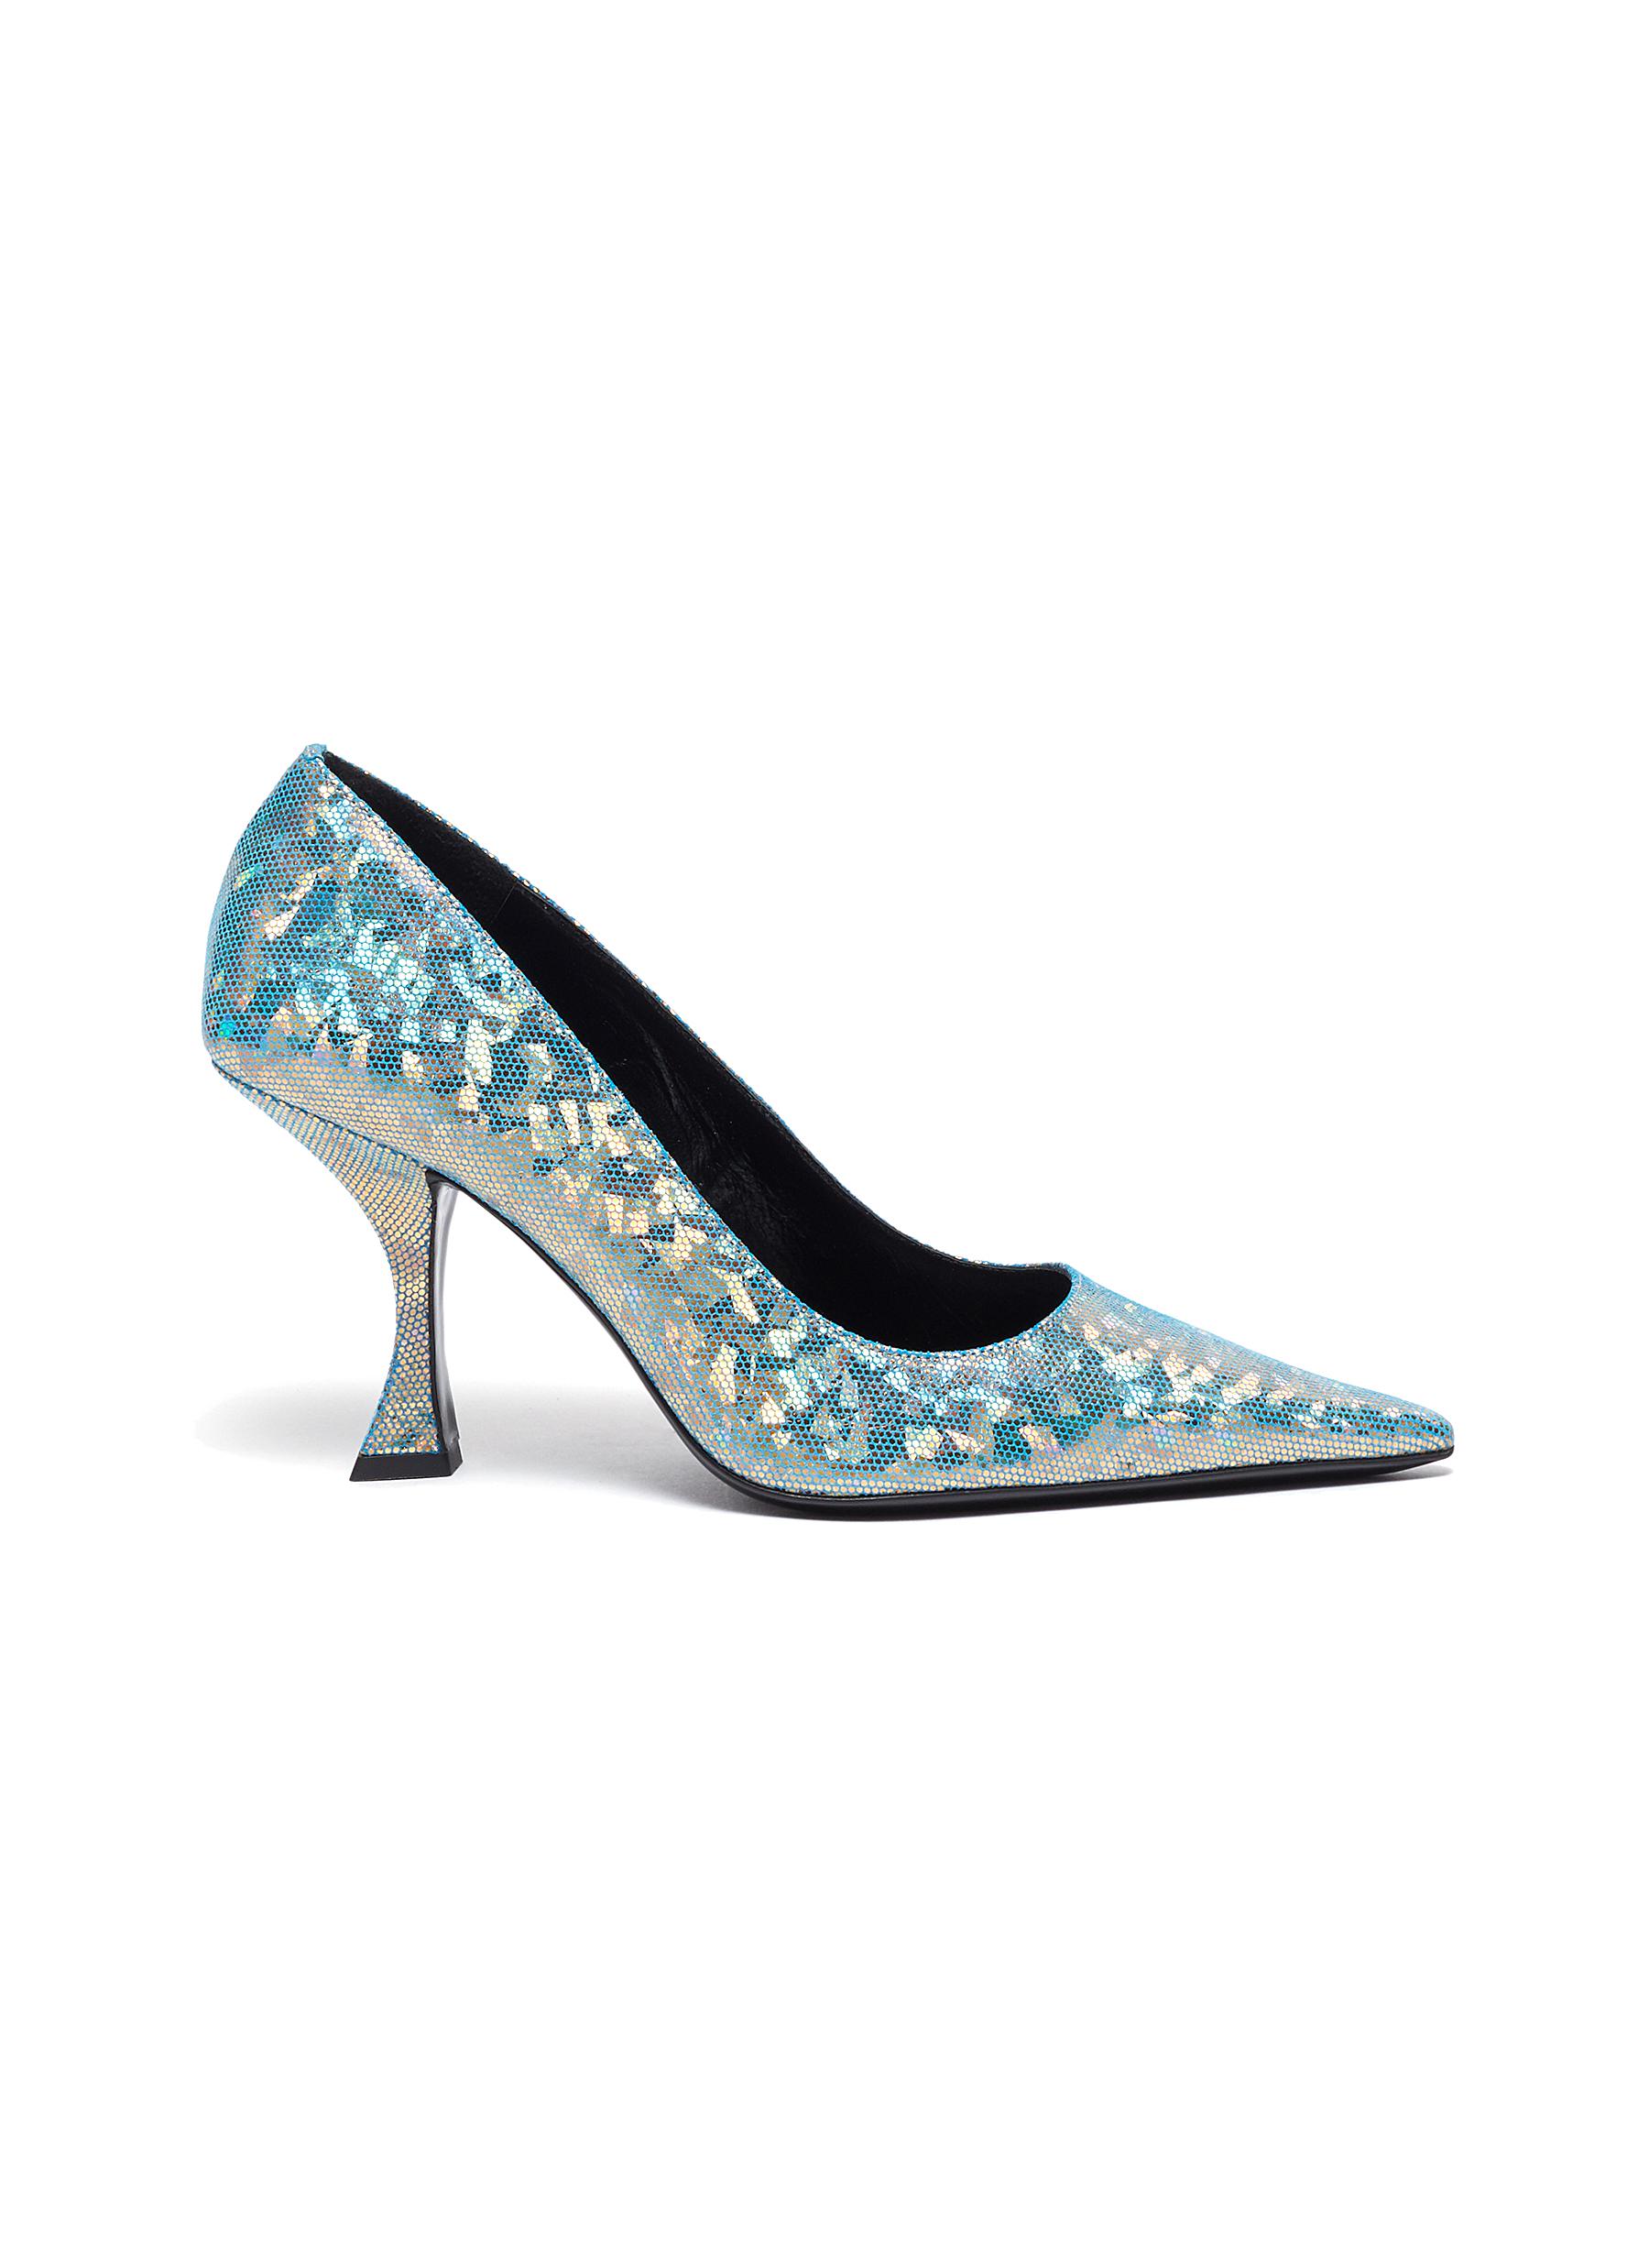 BY FAR Viva' Mesh Overlay Holographic Leather Point Toe Pumps | Women | Lane Crawford